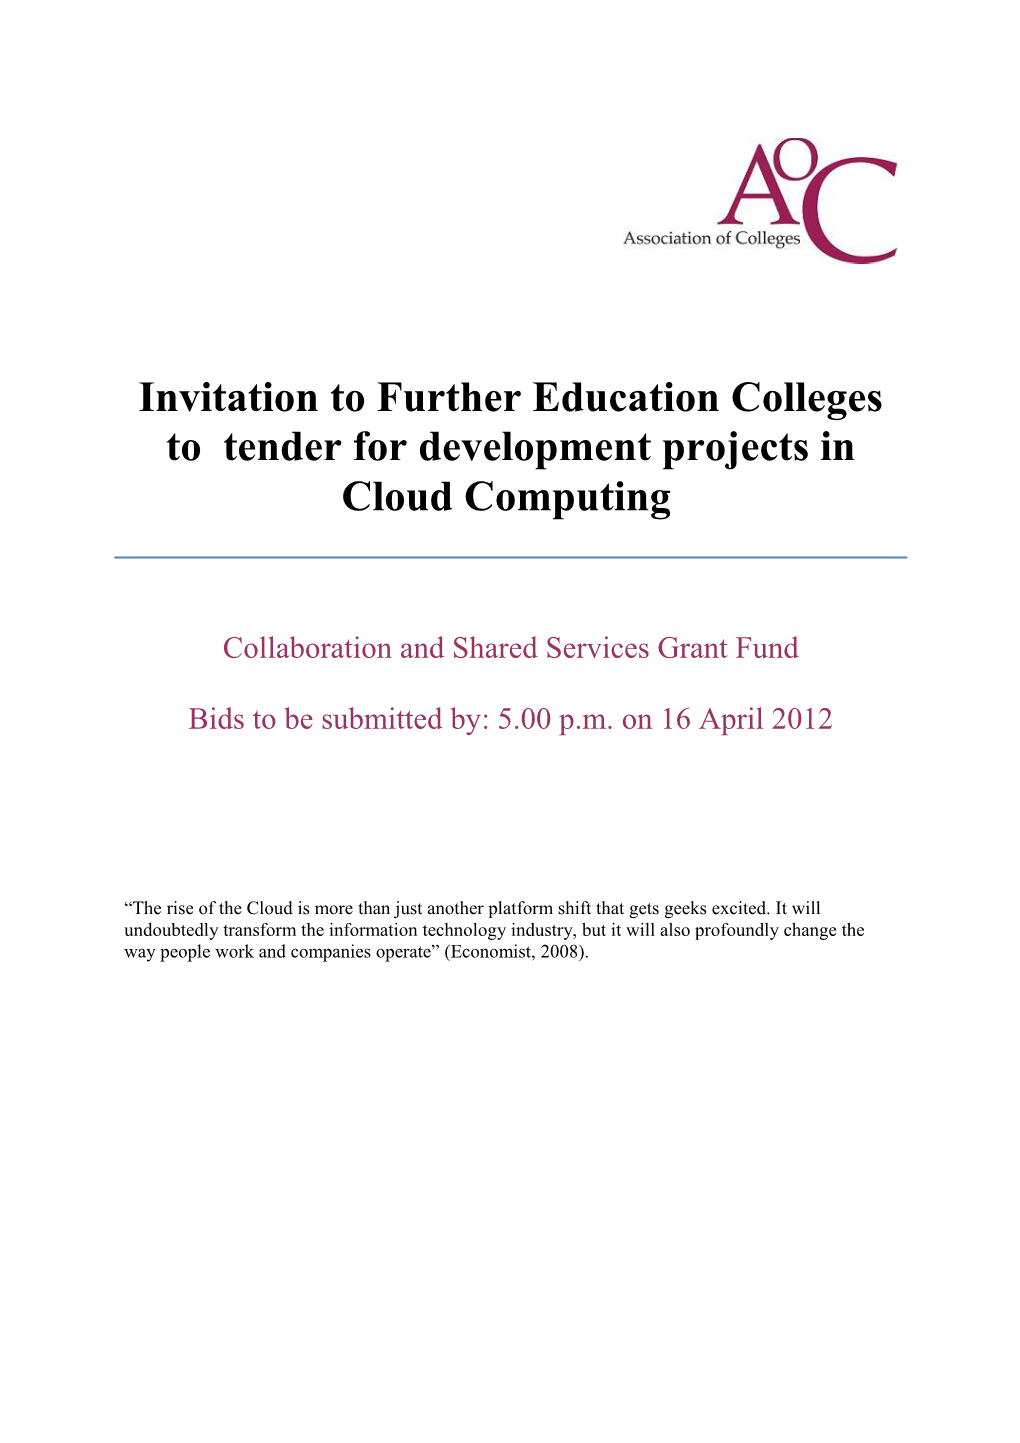 Invitation to Further Education Colleges to Tender for Start-Up Projects in Cloud Computing